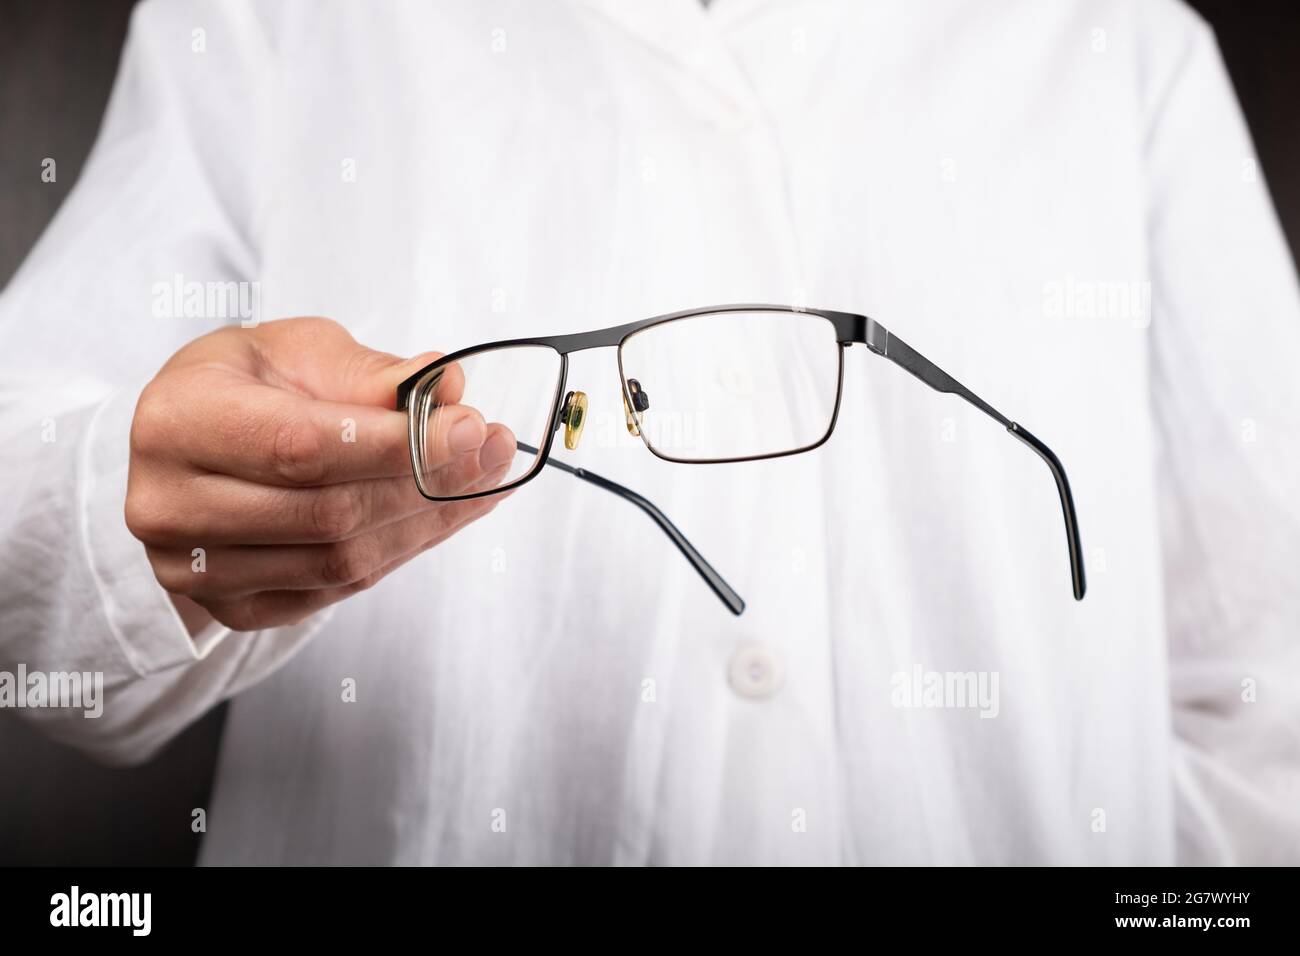 optician doctor  gives glasses to a patient to improve vision. Stock Photo